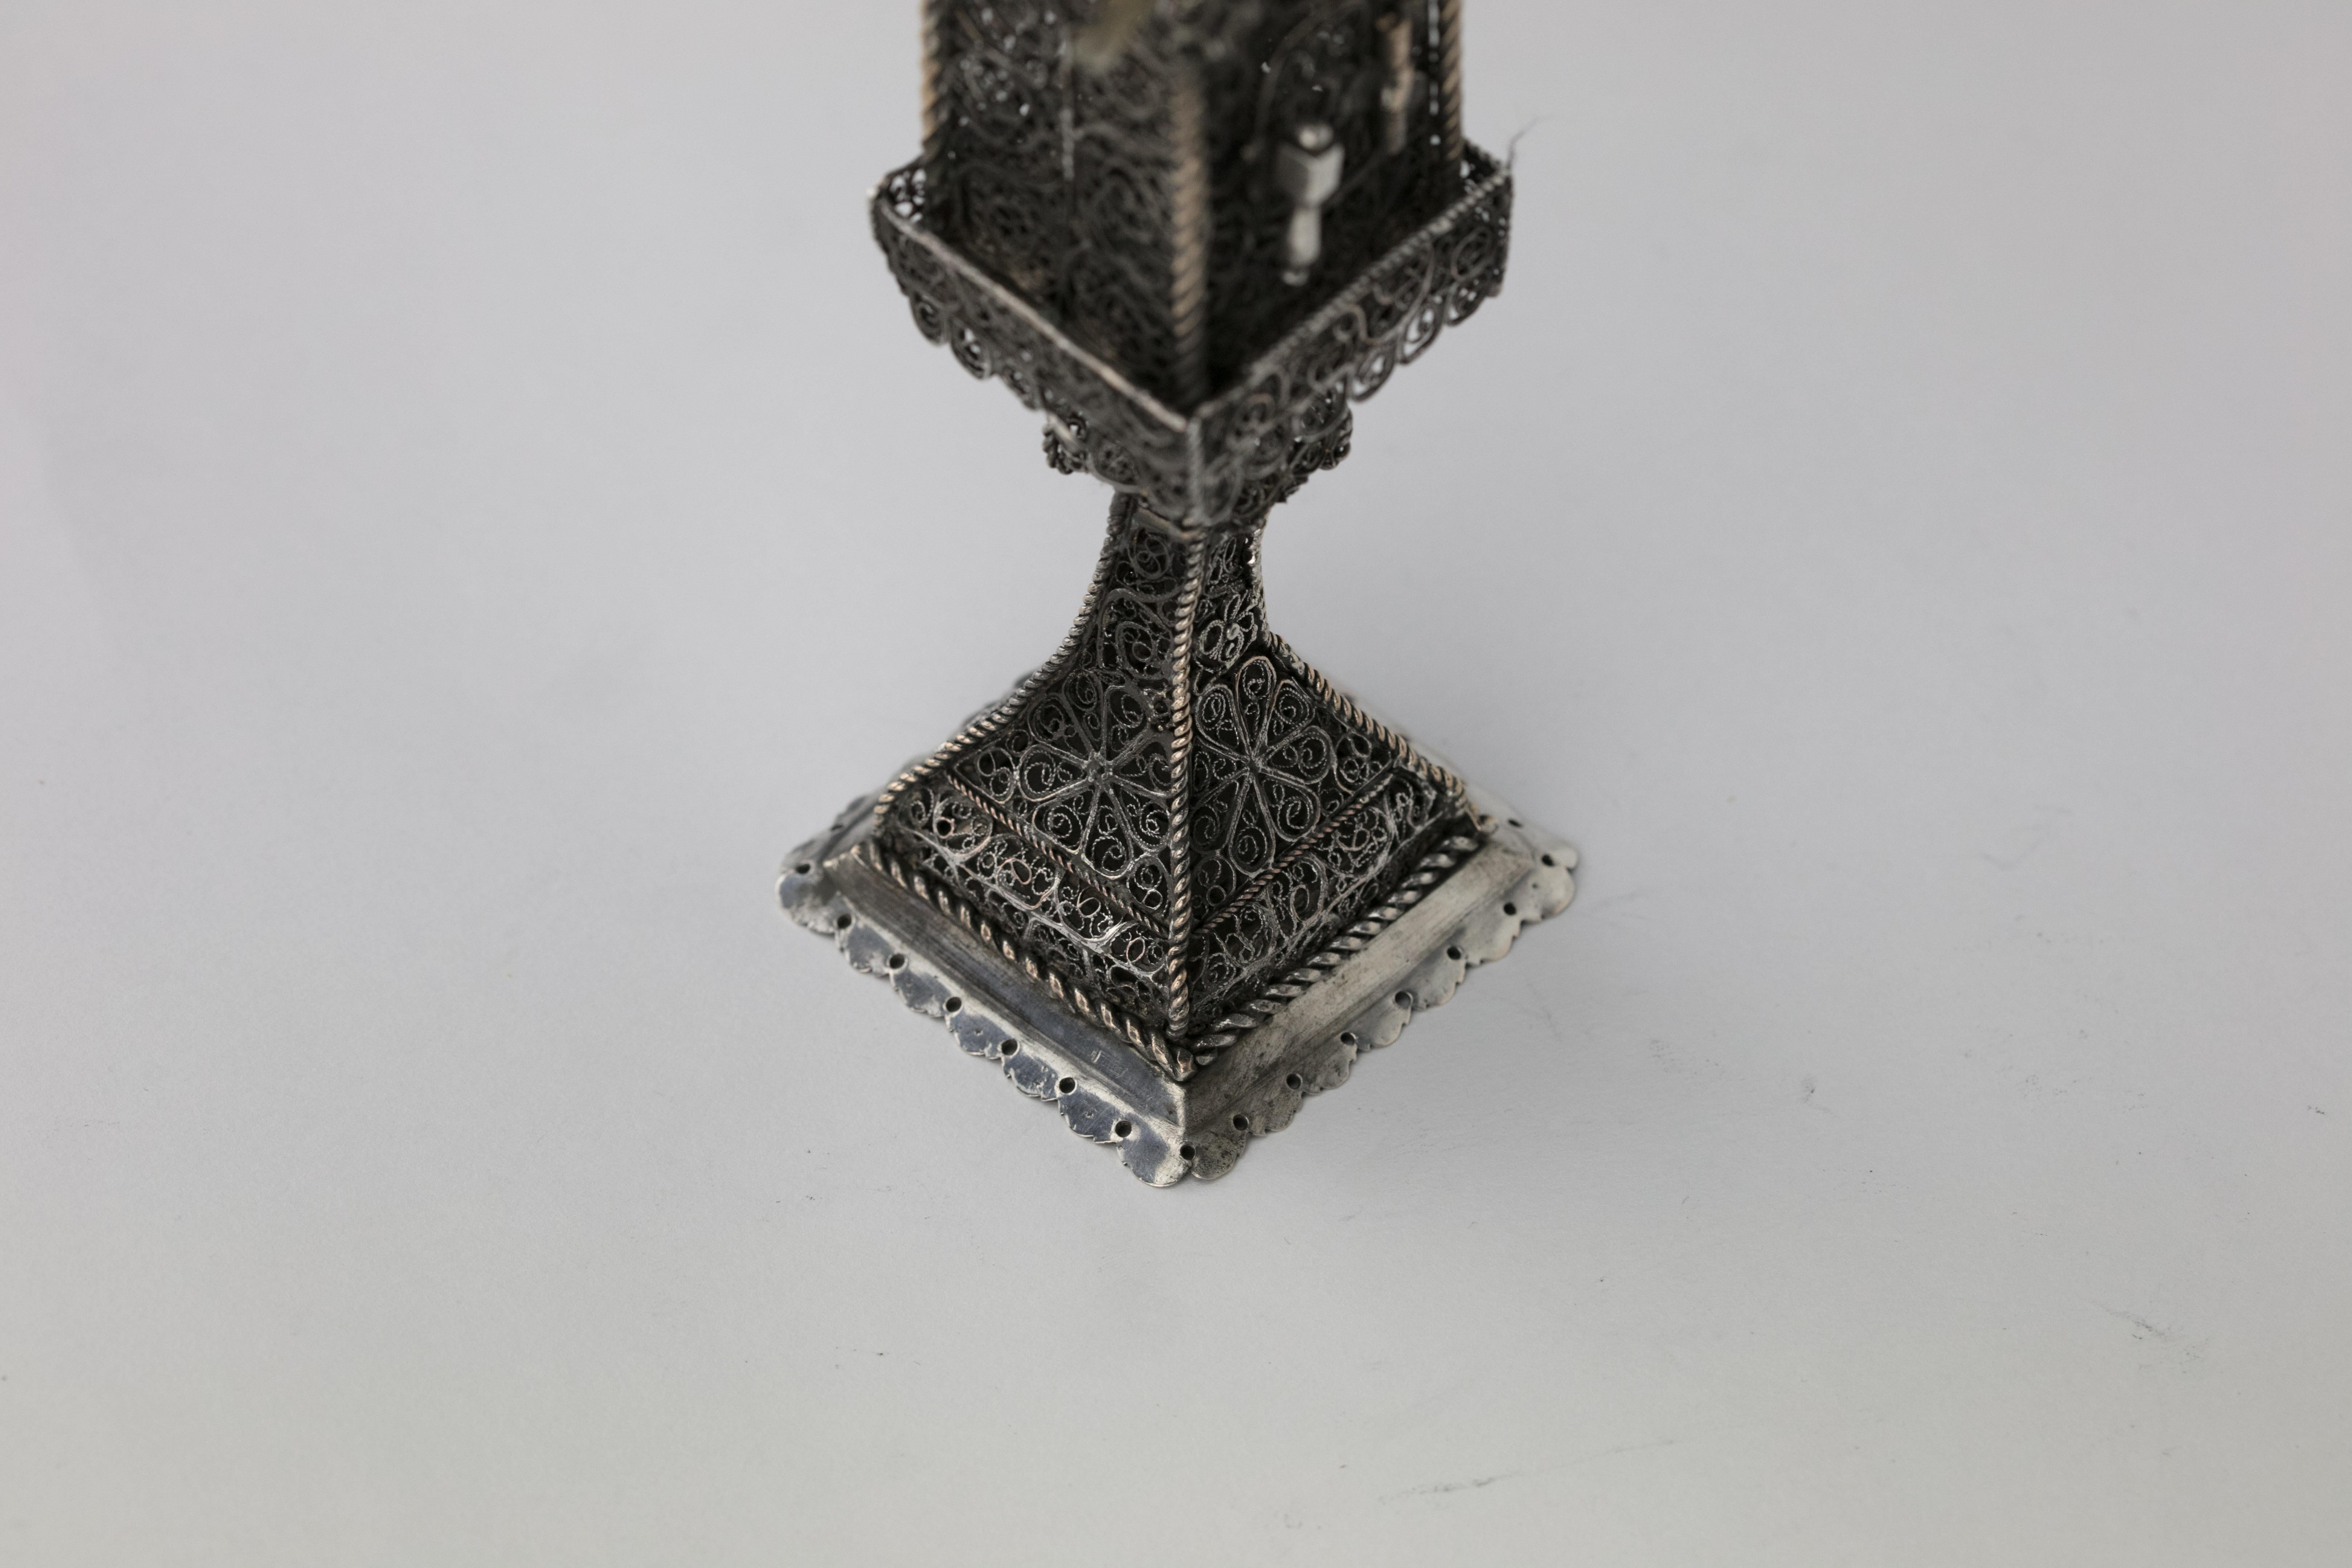 Handmade silver and silver filigree spice tower, Ukraine, Lemberg (Lvov), circa 1780.
On solid square base. Made entirely of hand spun filigree. With four small flags decorating main section.
The main section (the box) has a hinged filigree door